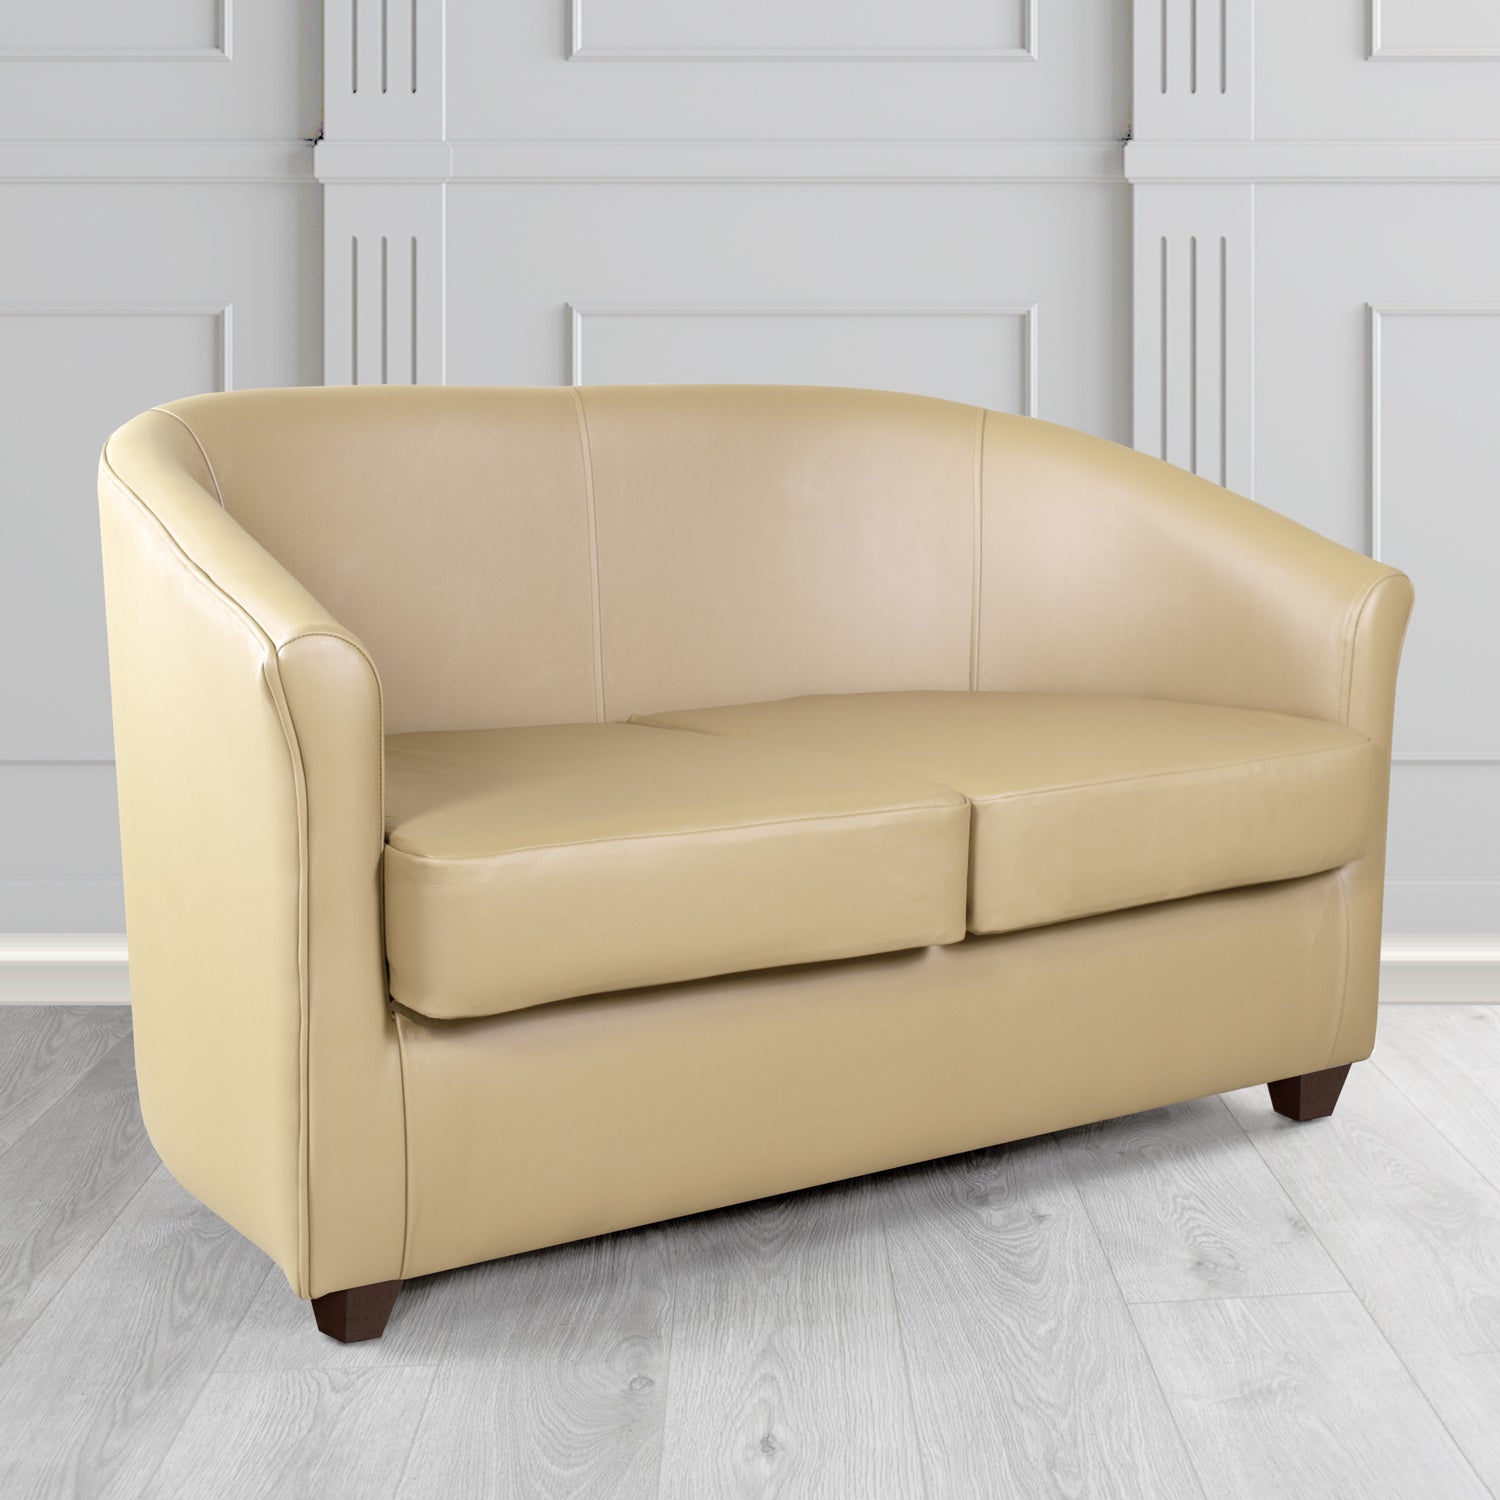 Cannes 2 Seater Tub Sofa in Just Colour Almond Crib 5 Faux Leather - The Tub Chair Shop